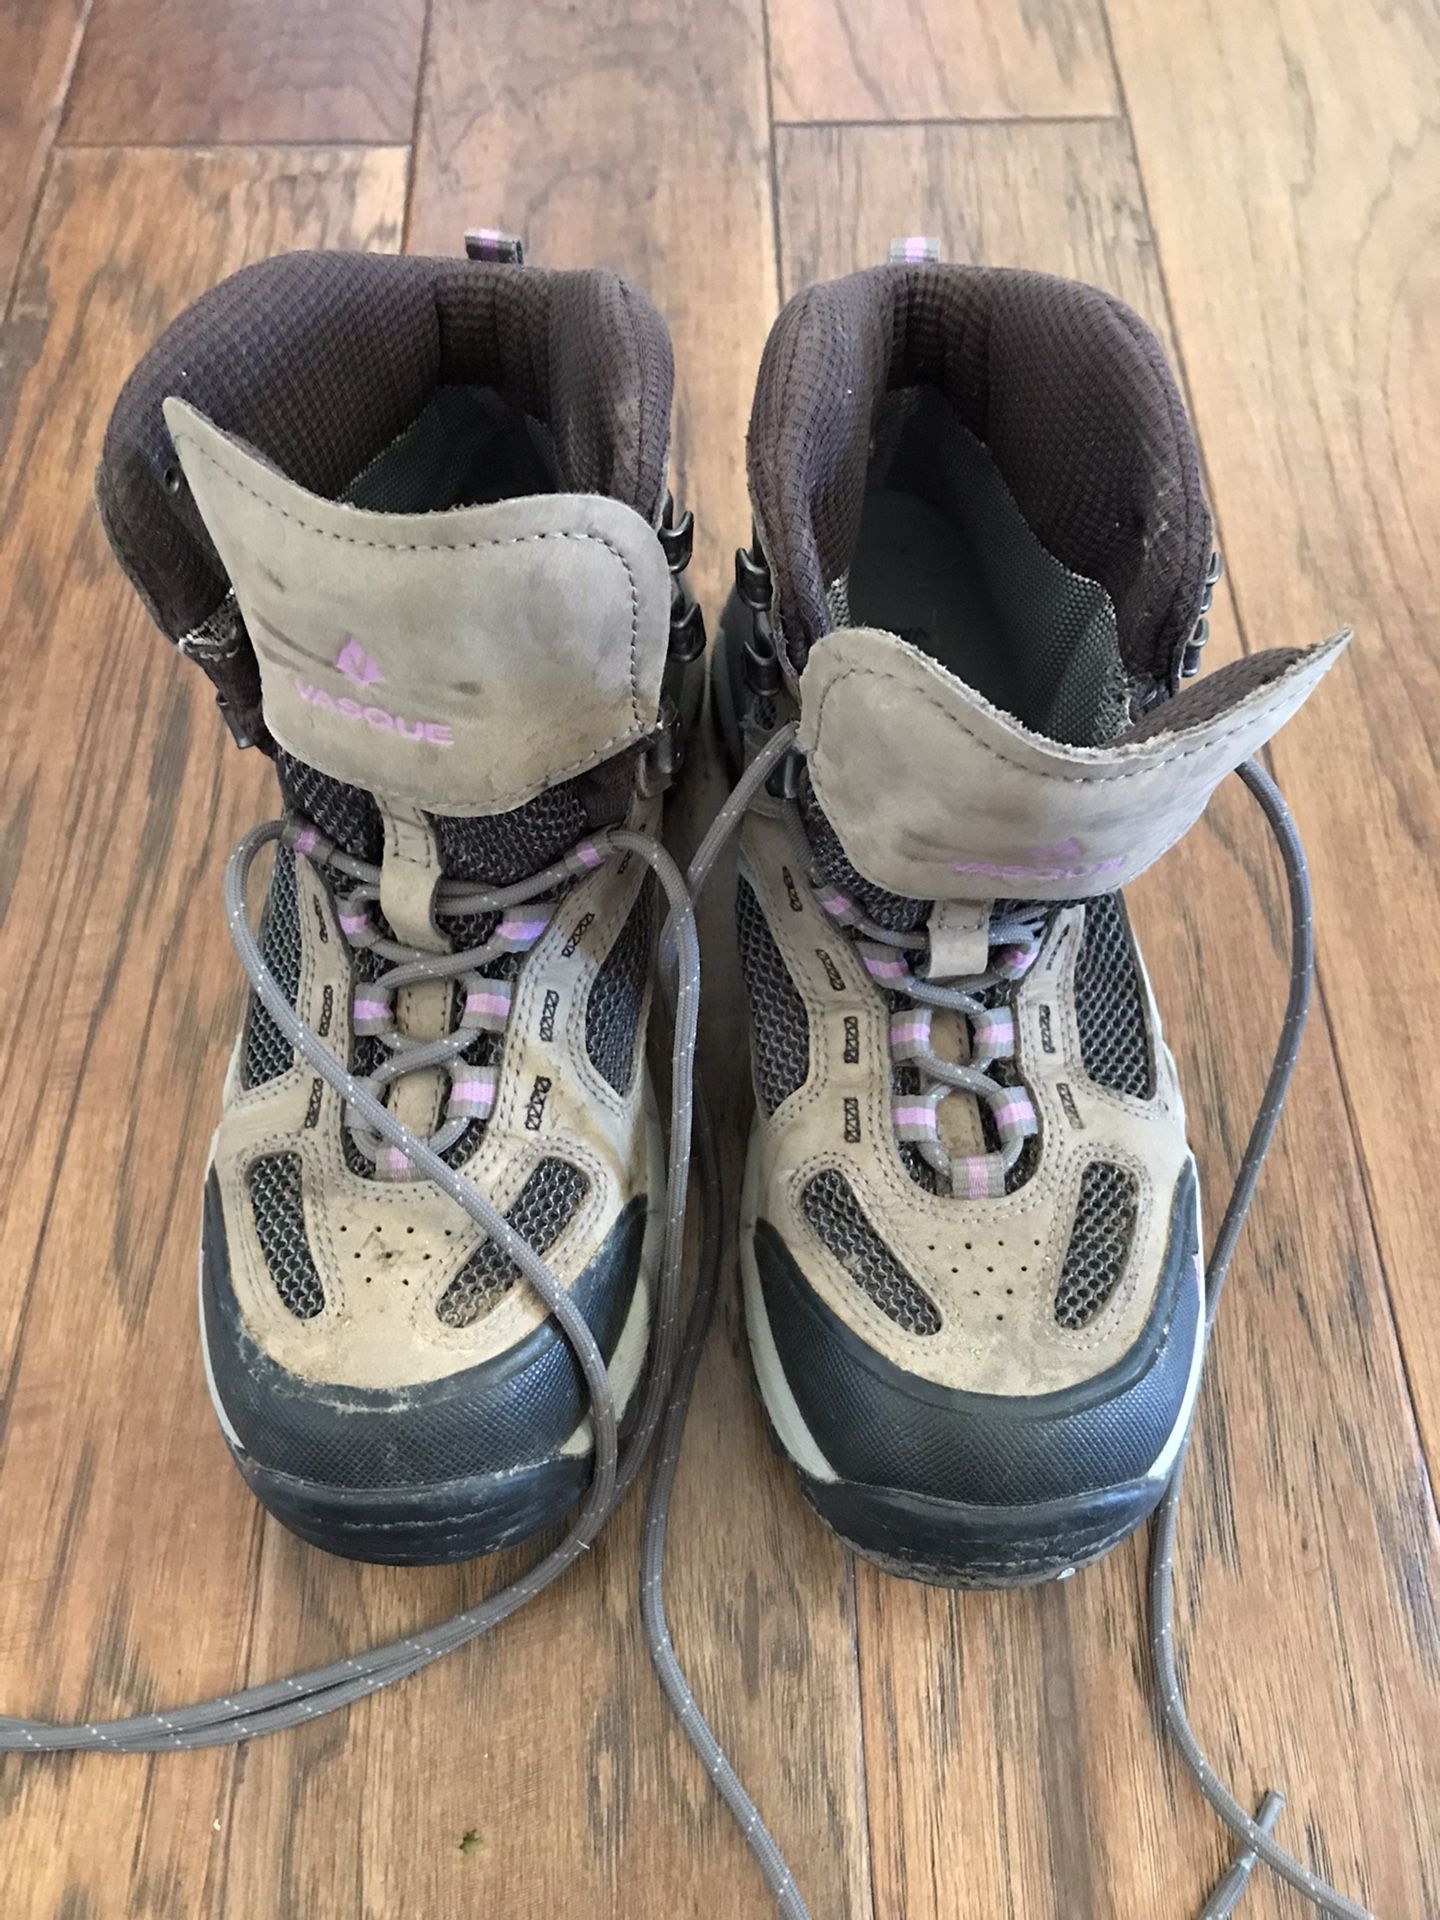 Vasque Womens Hiking Boots Size 8